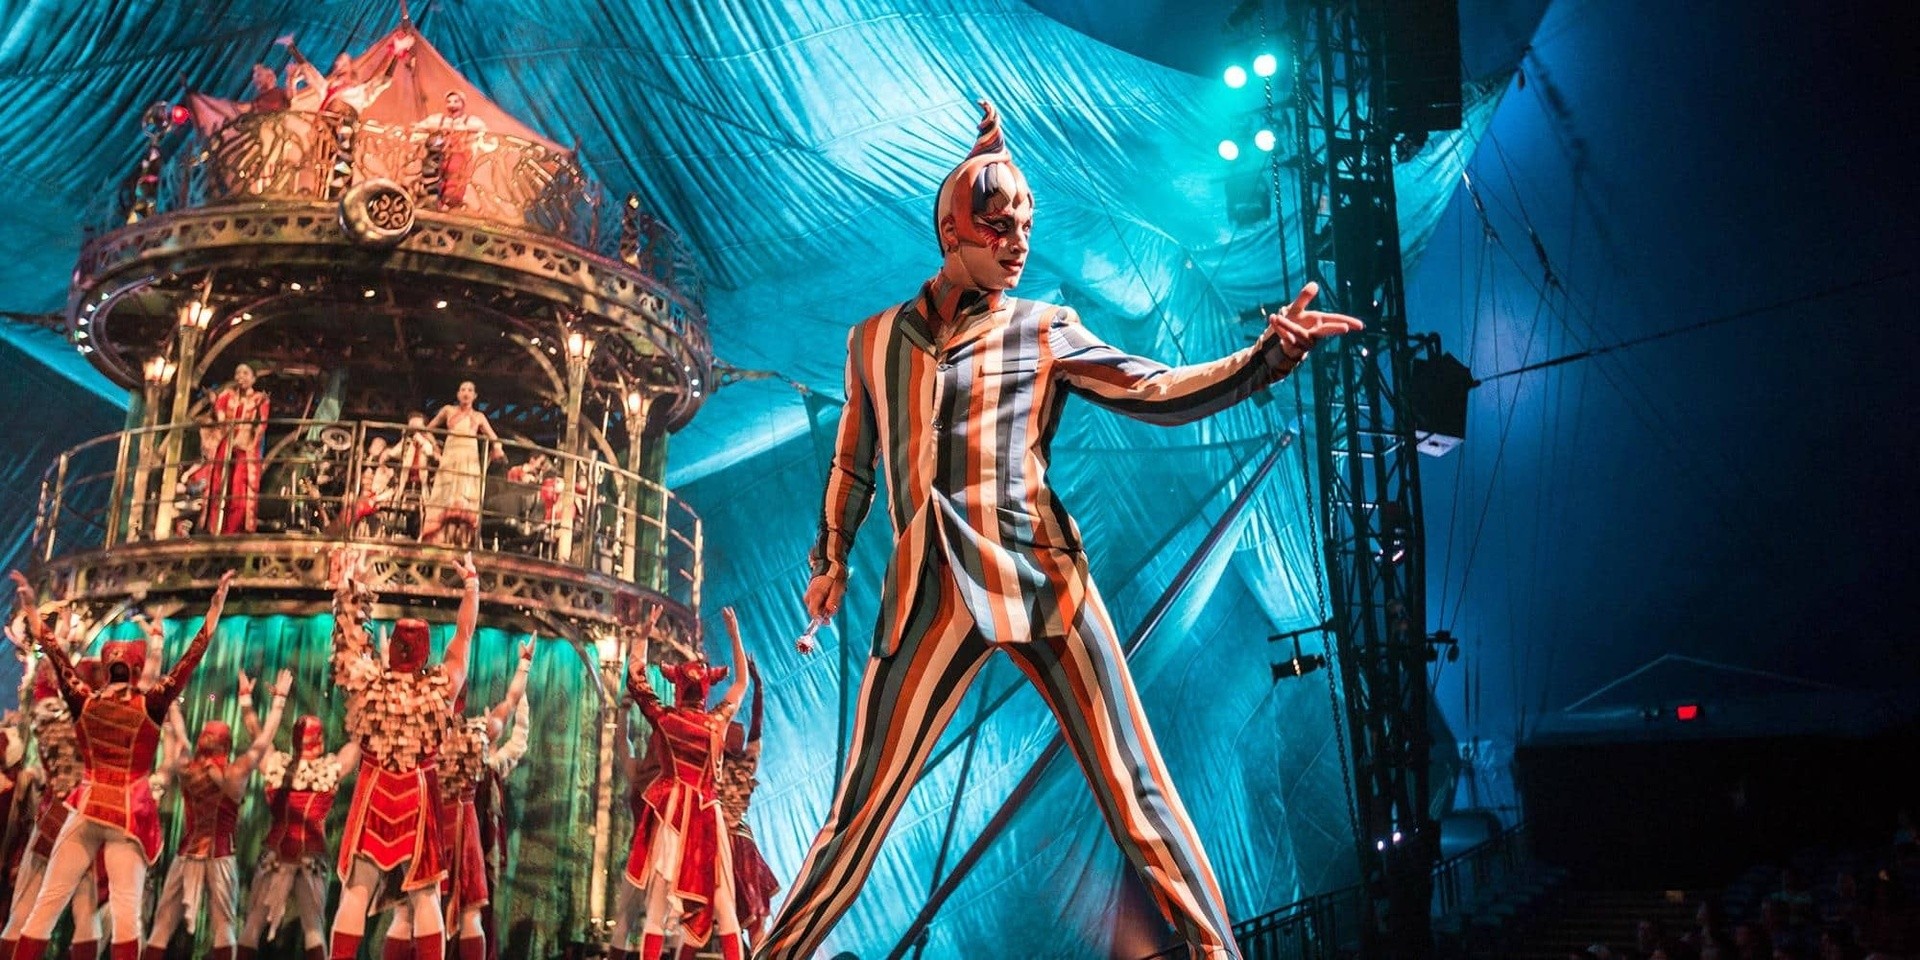 What goes into a Cirque du Soleil show, especially the music — watch